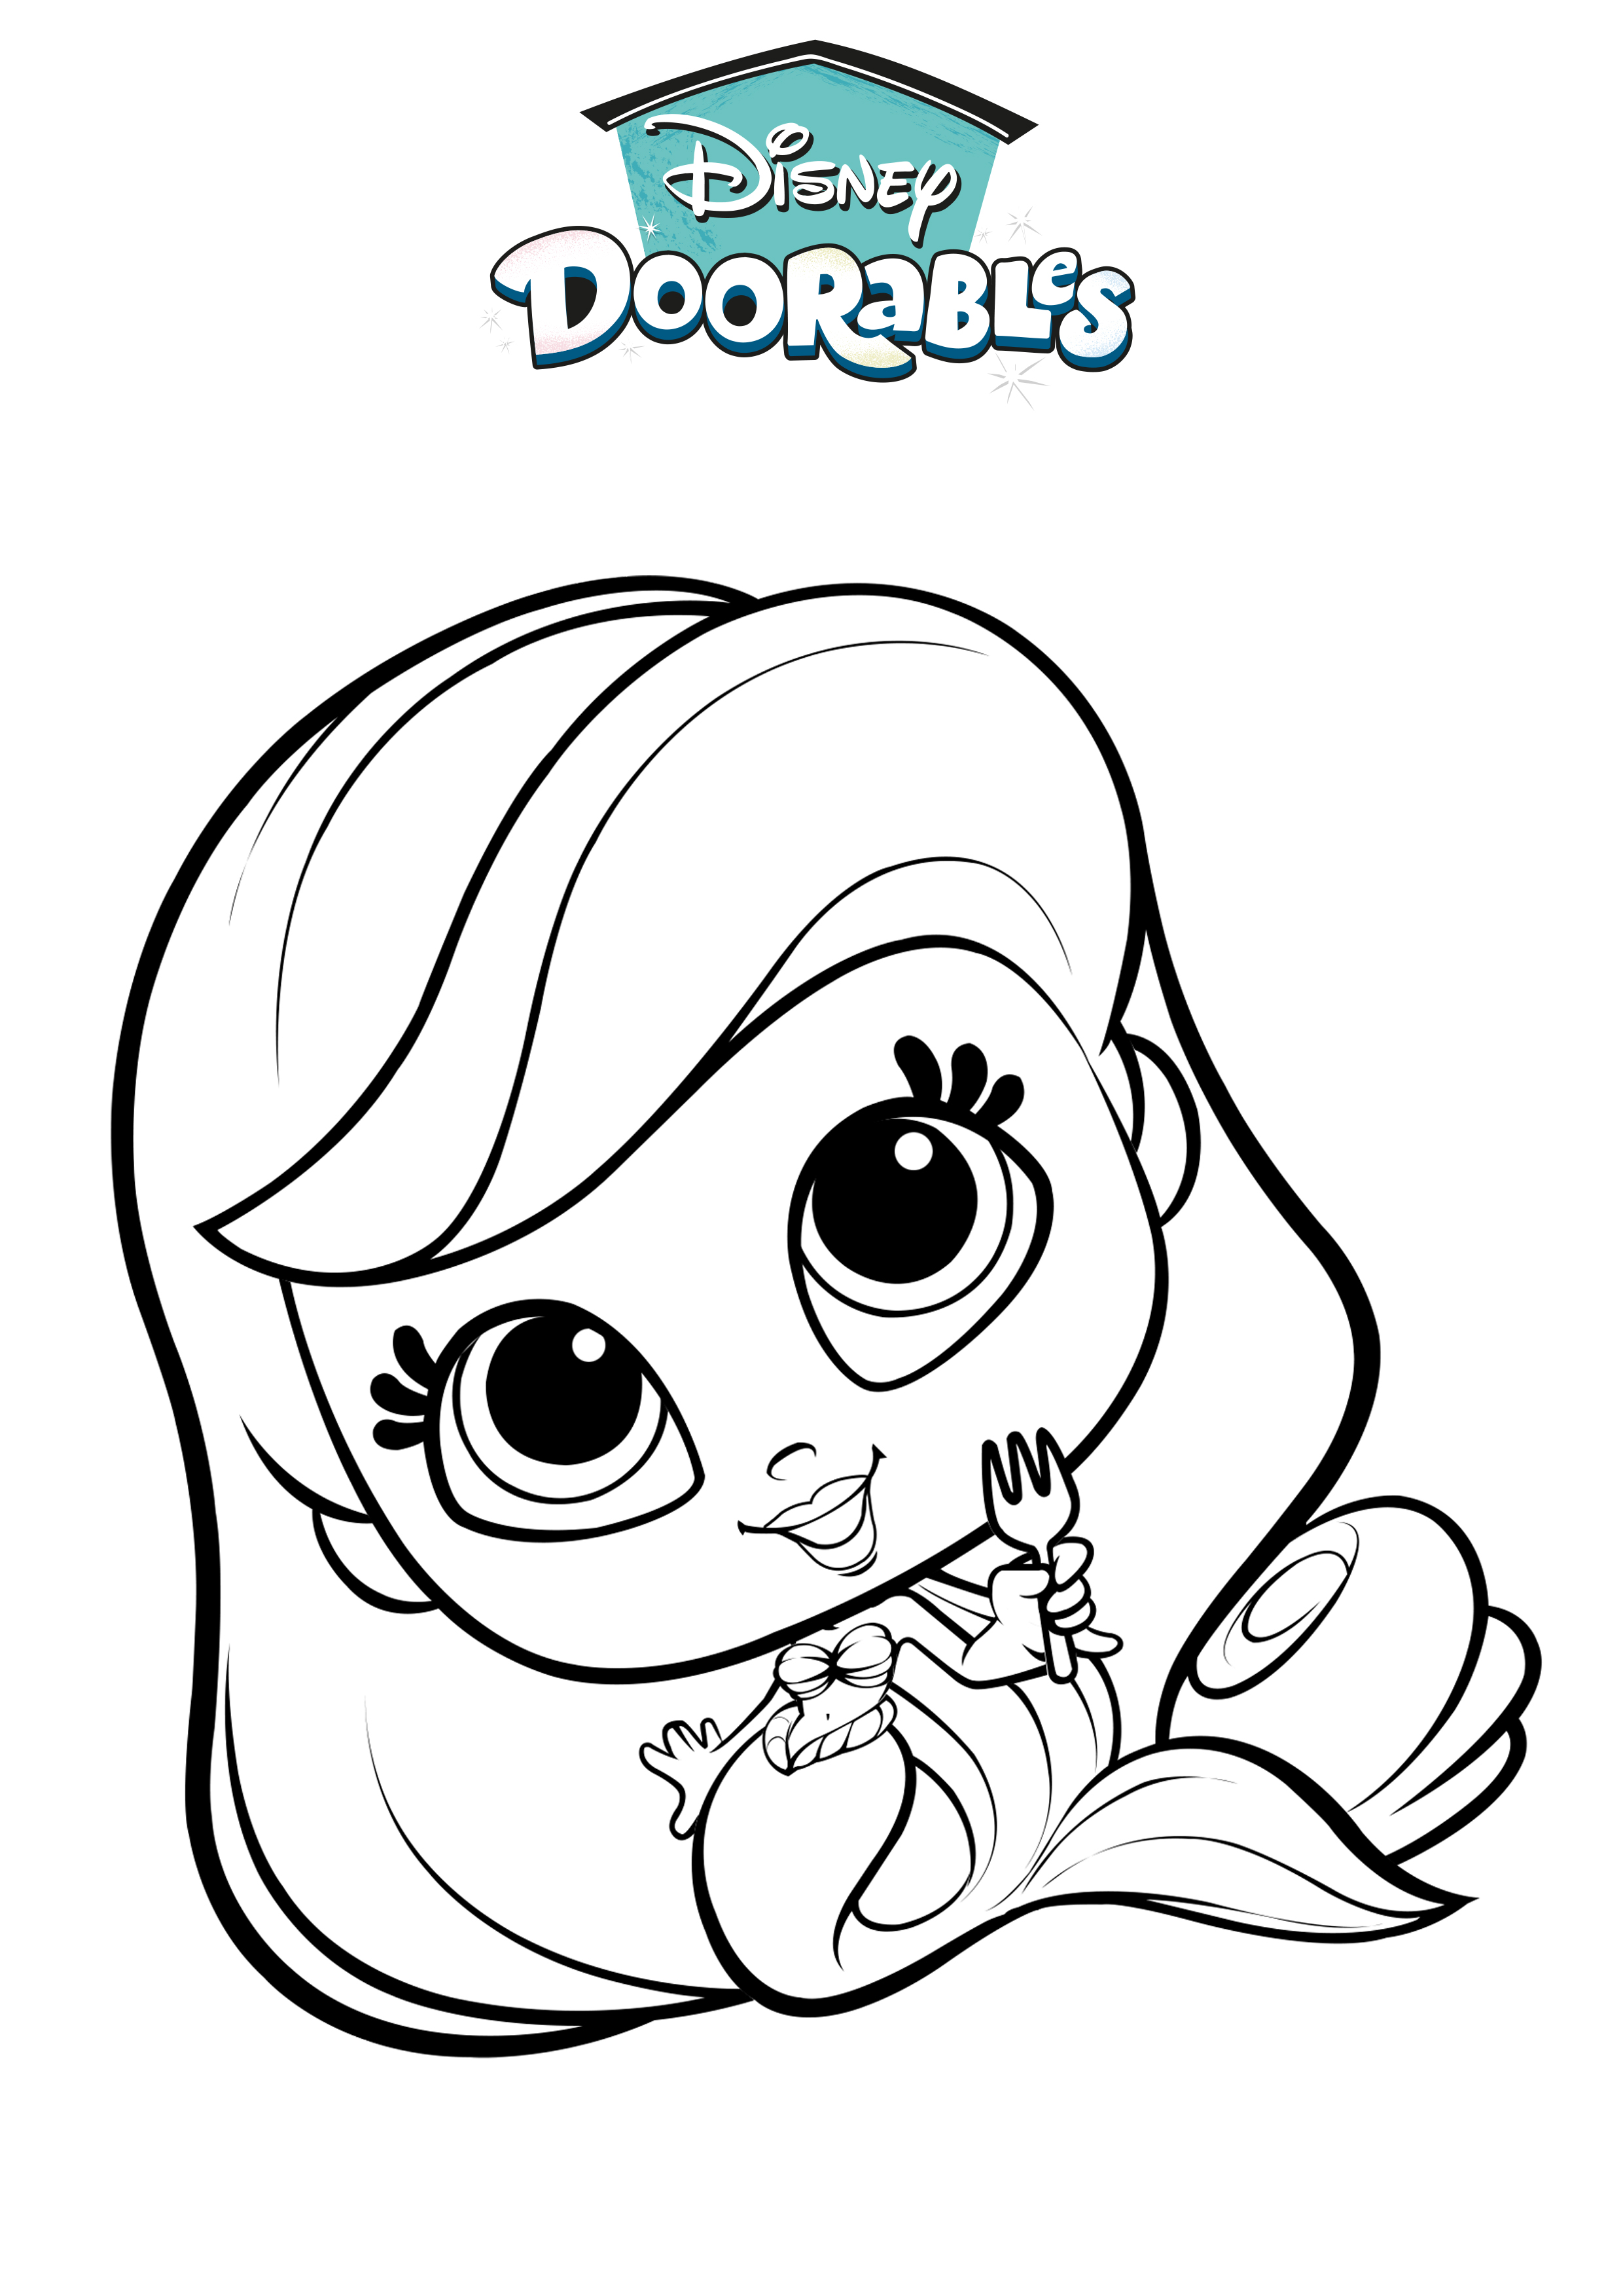 Download Your Doorables World Colouring Sheets Uk Mums Tv